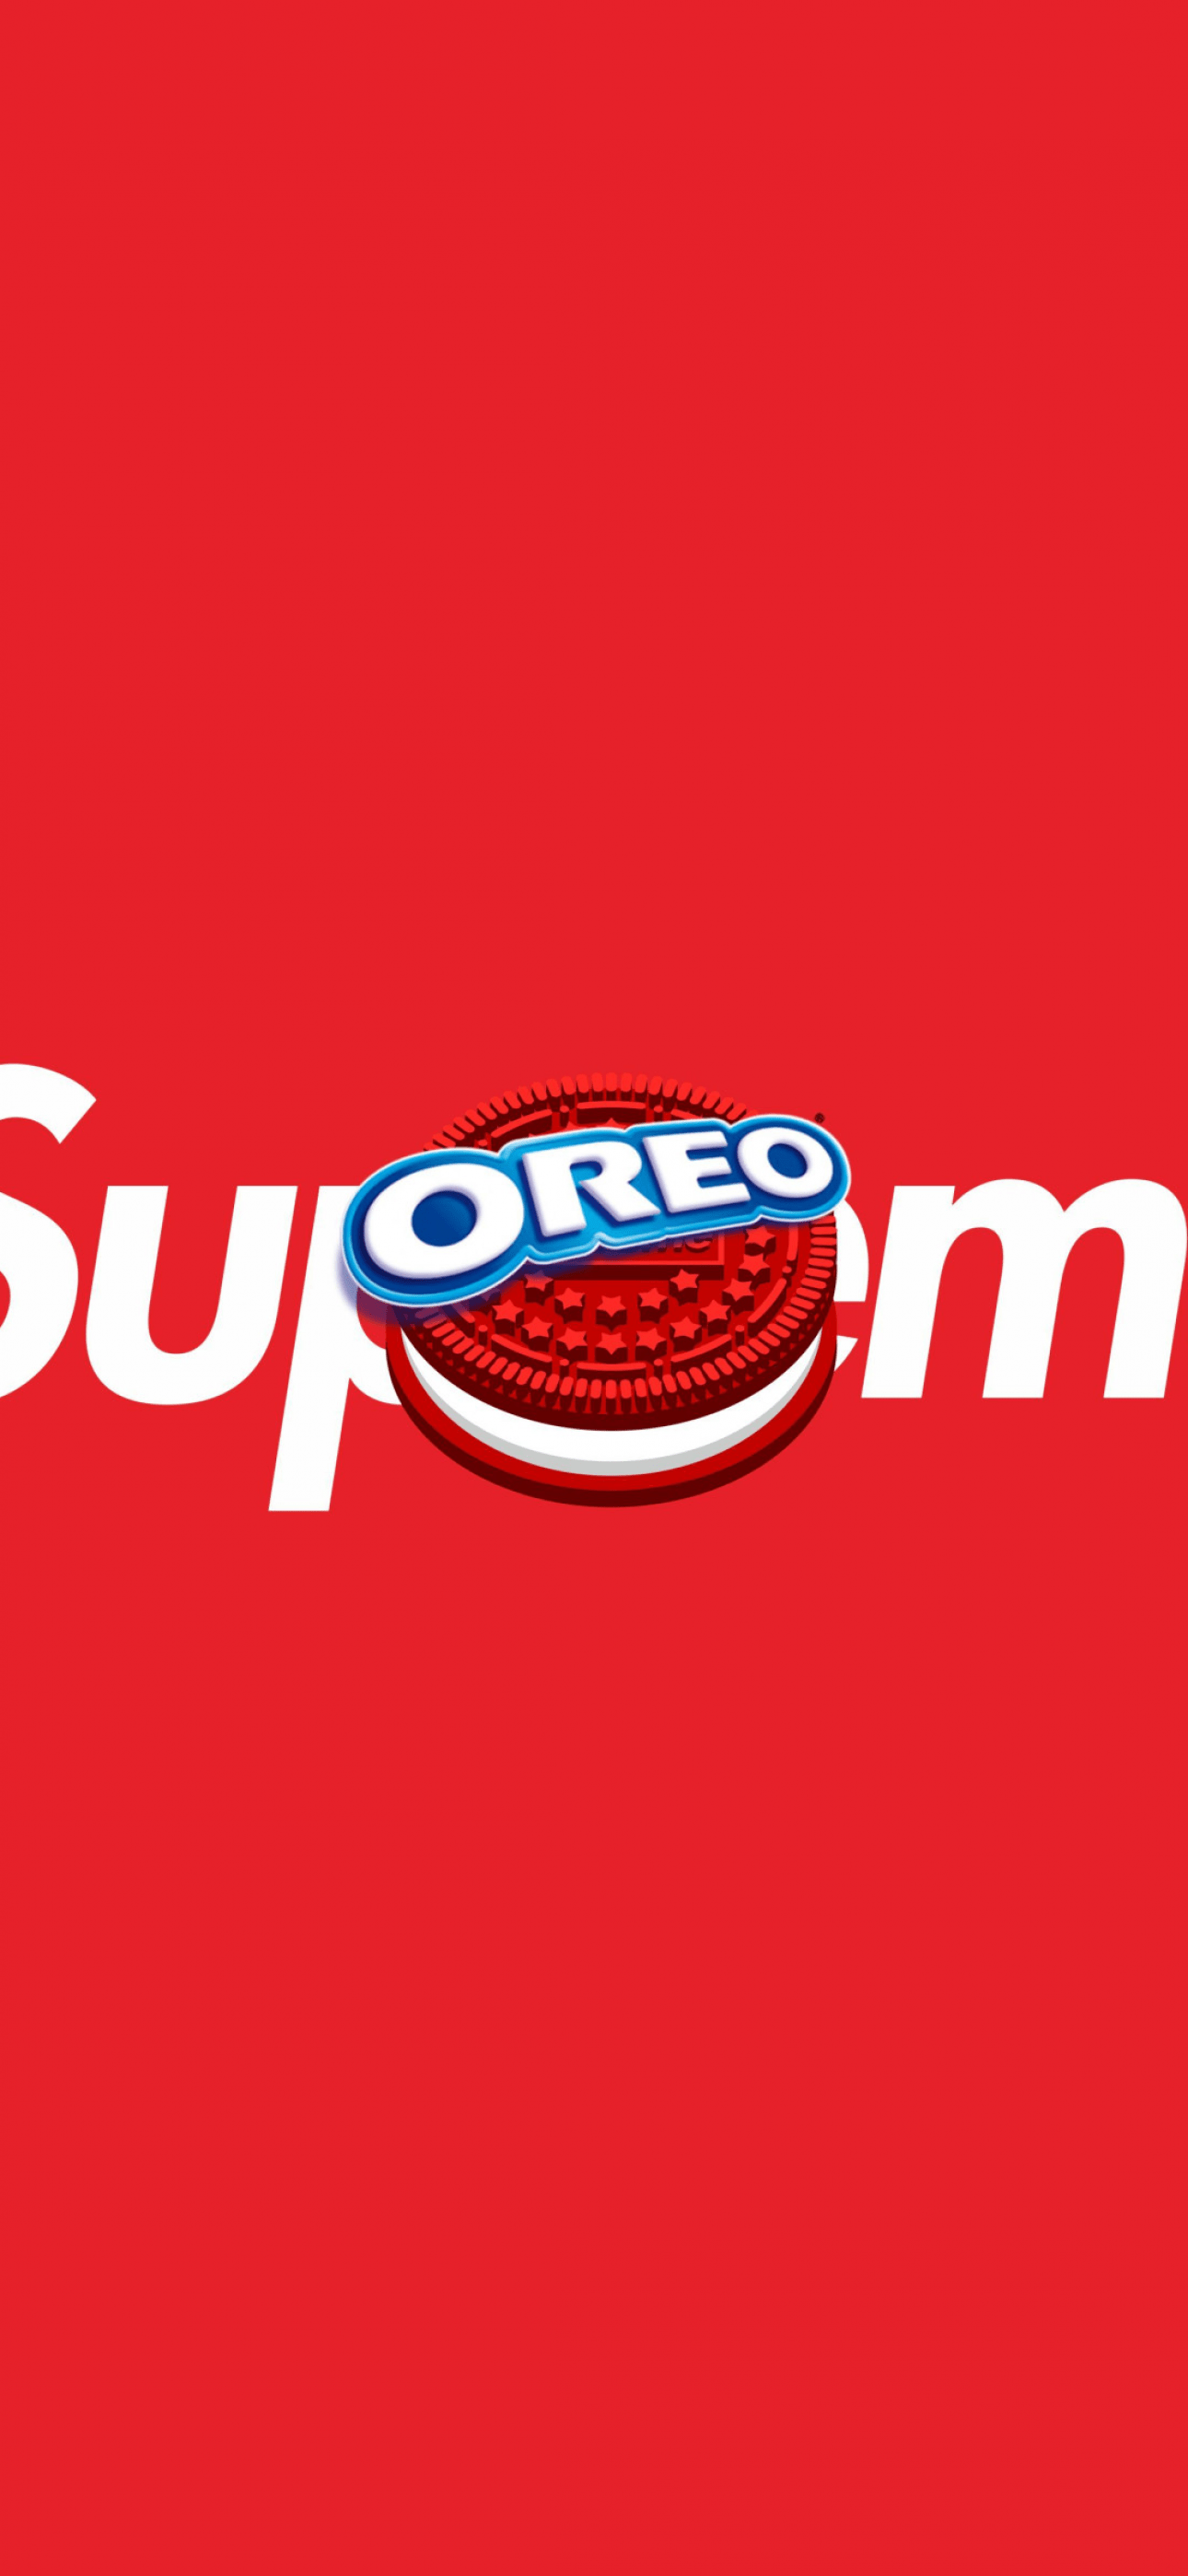 Supreme Oreo iPhone Wallpaper with high-resolution 1080x1920 pixel. You can use this wallpaper for your iPhone 5, 6, 7, 8, X, XS, XR backgrounds, Mobile Screensaver, or iPad Lock Screen - Oreo, Supreme